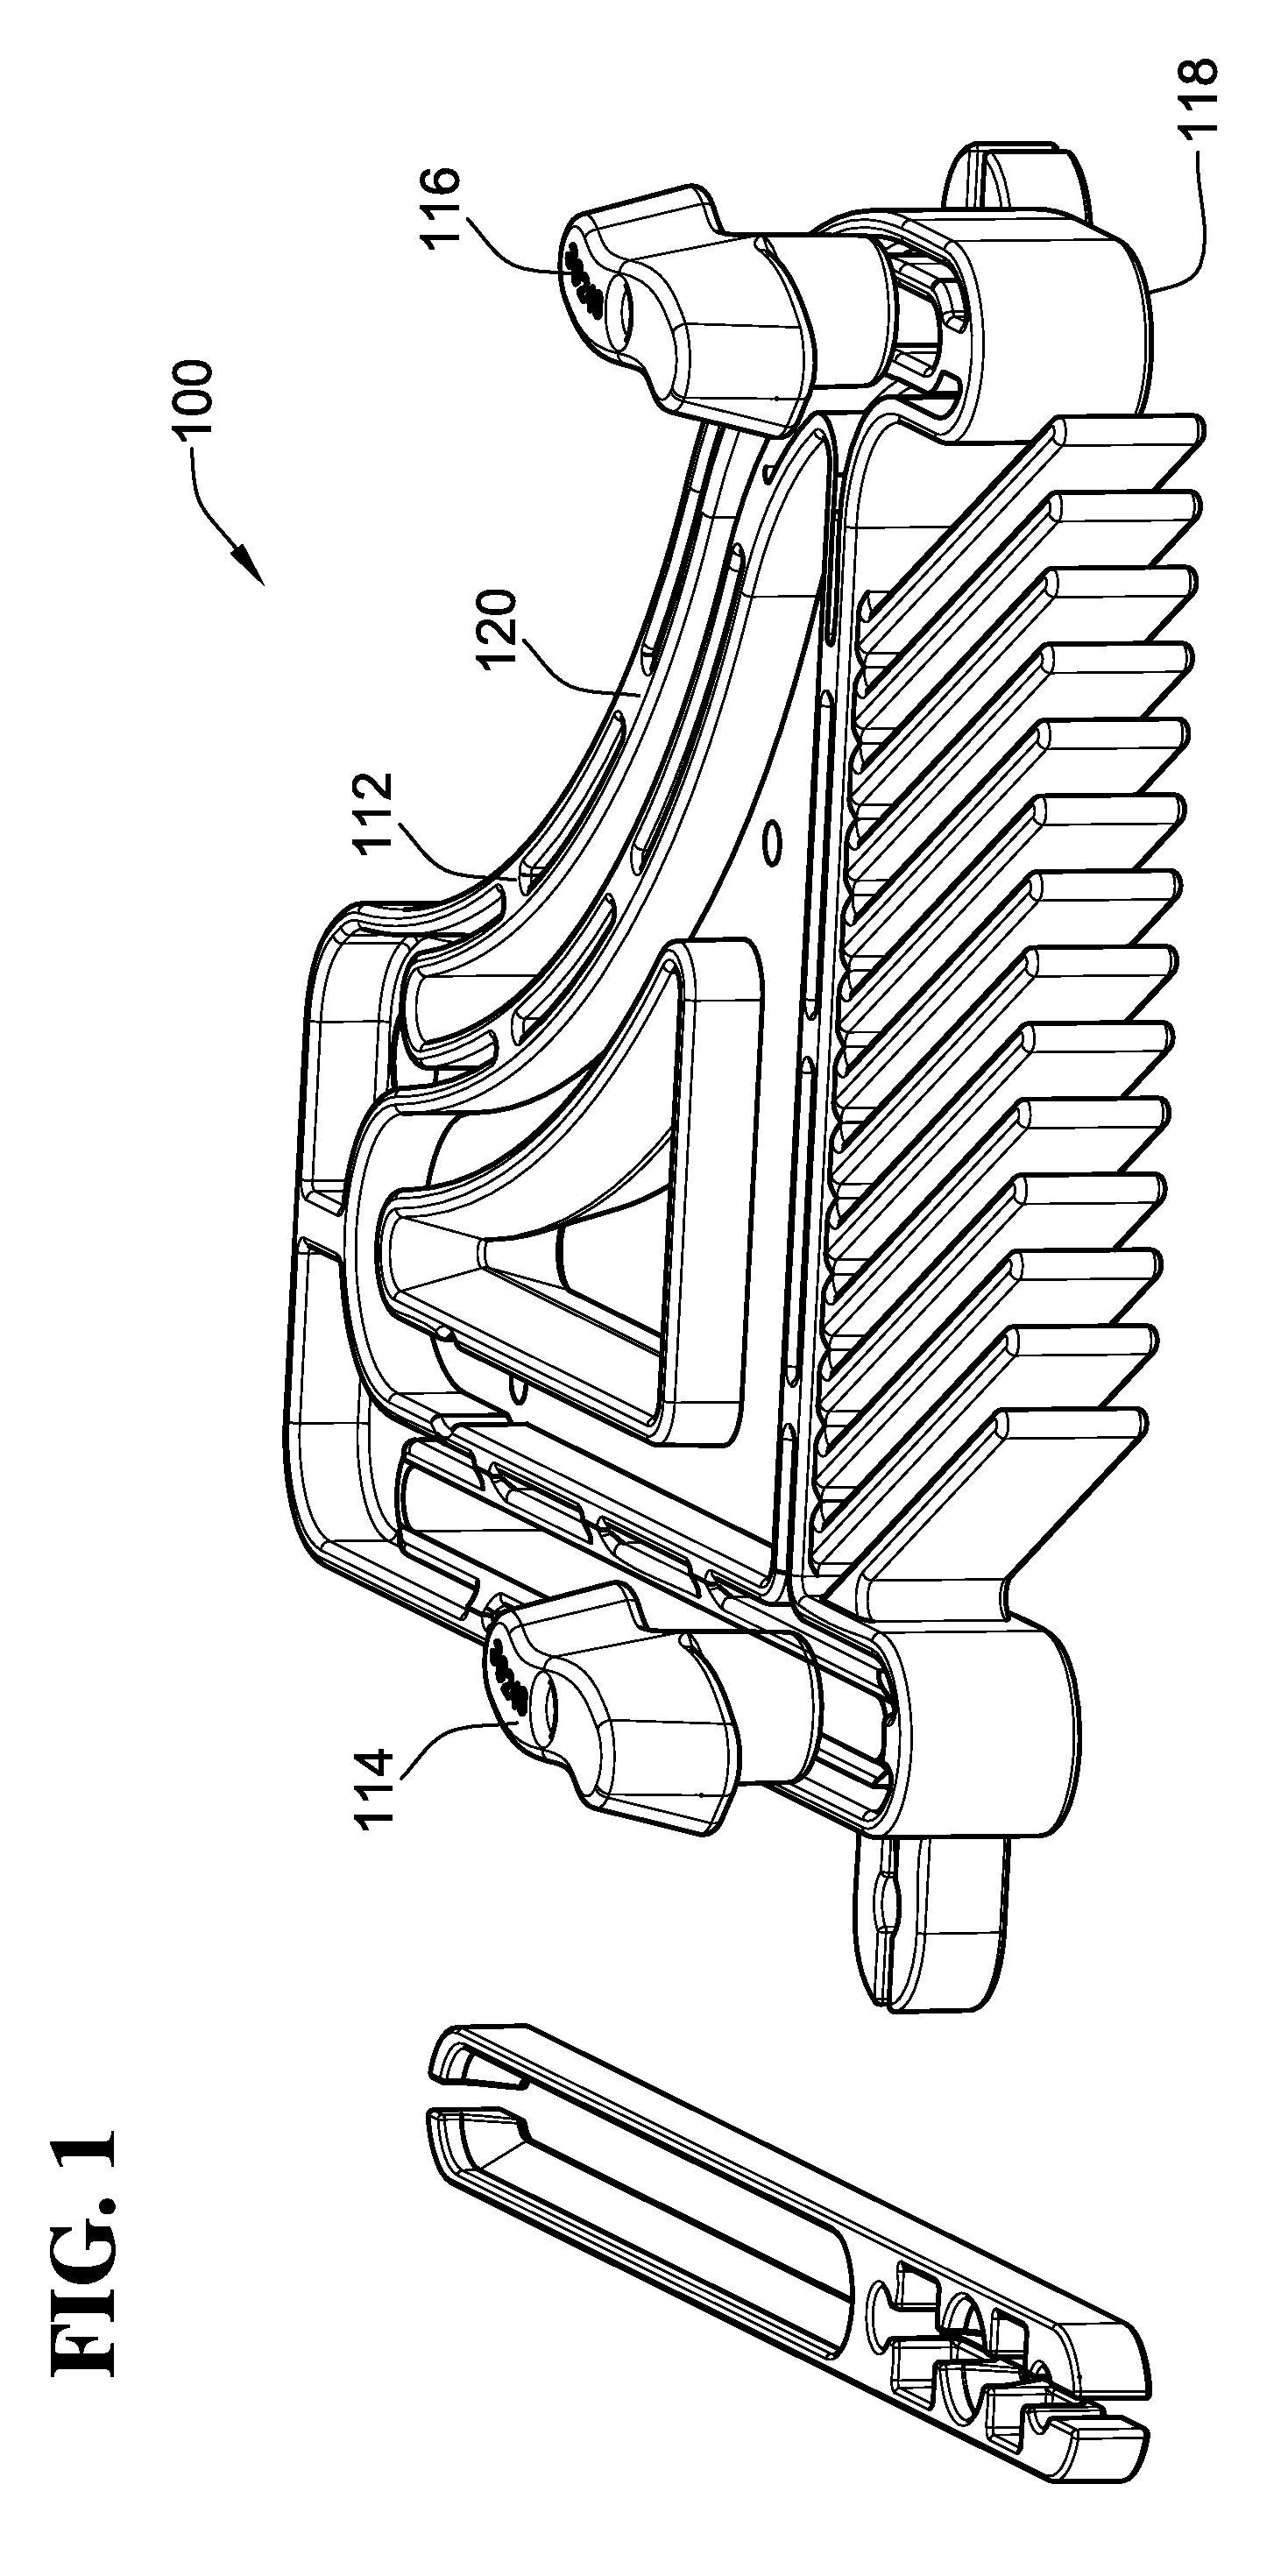 Feather board apparatus and method